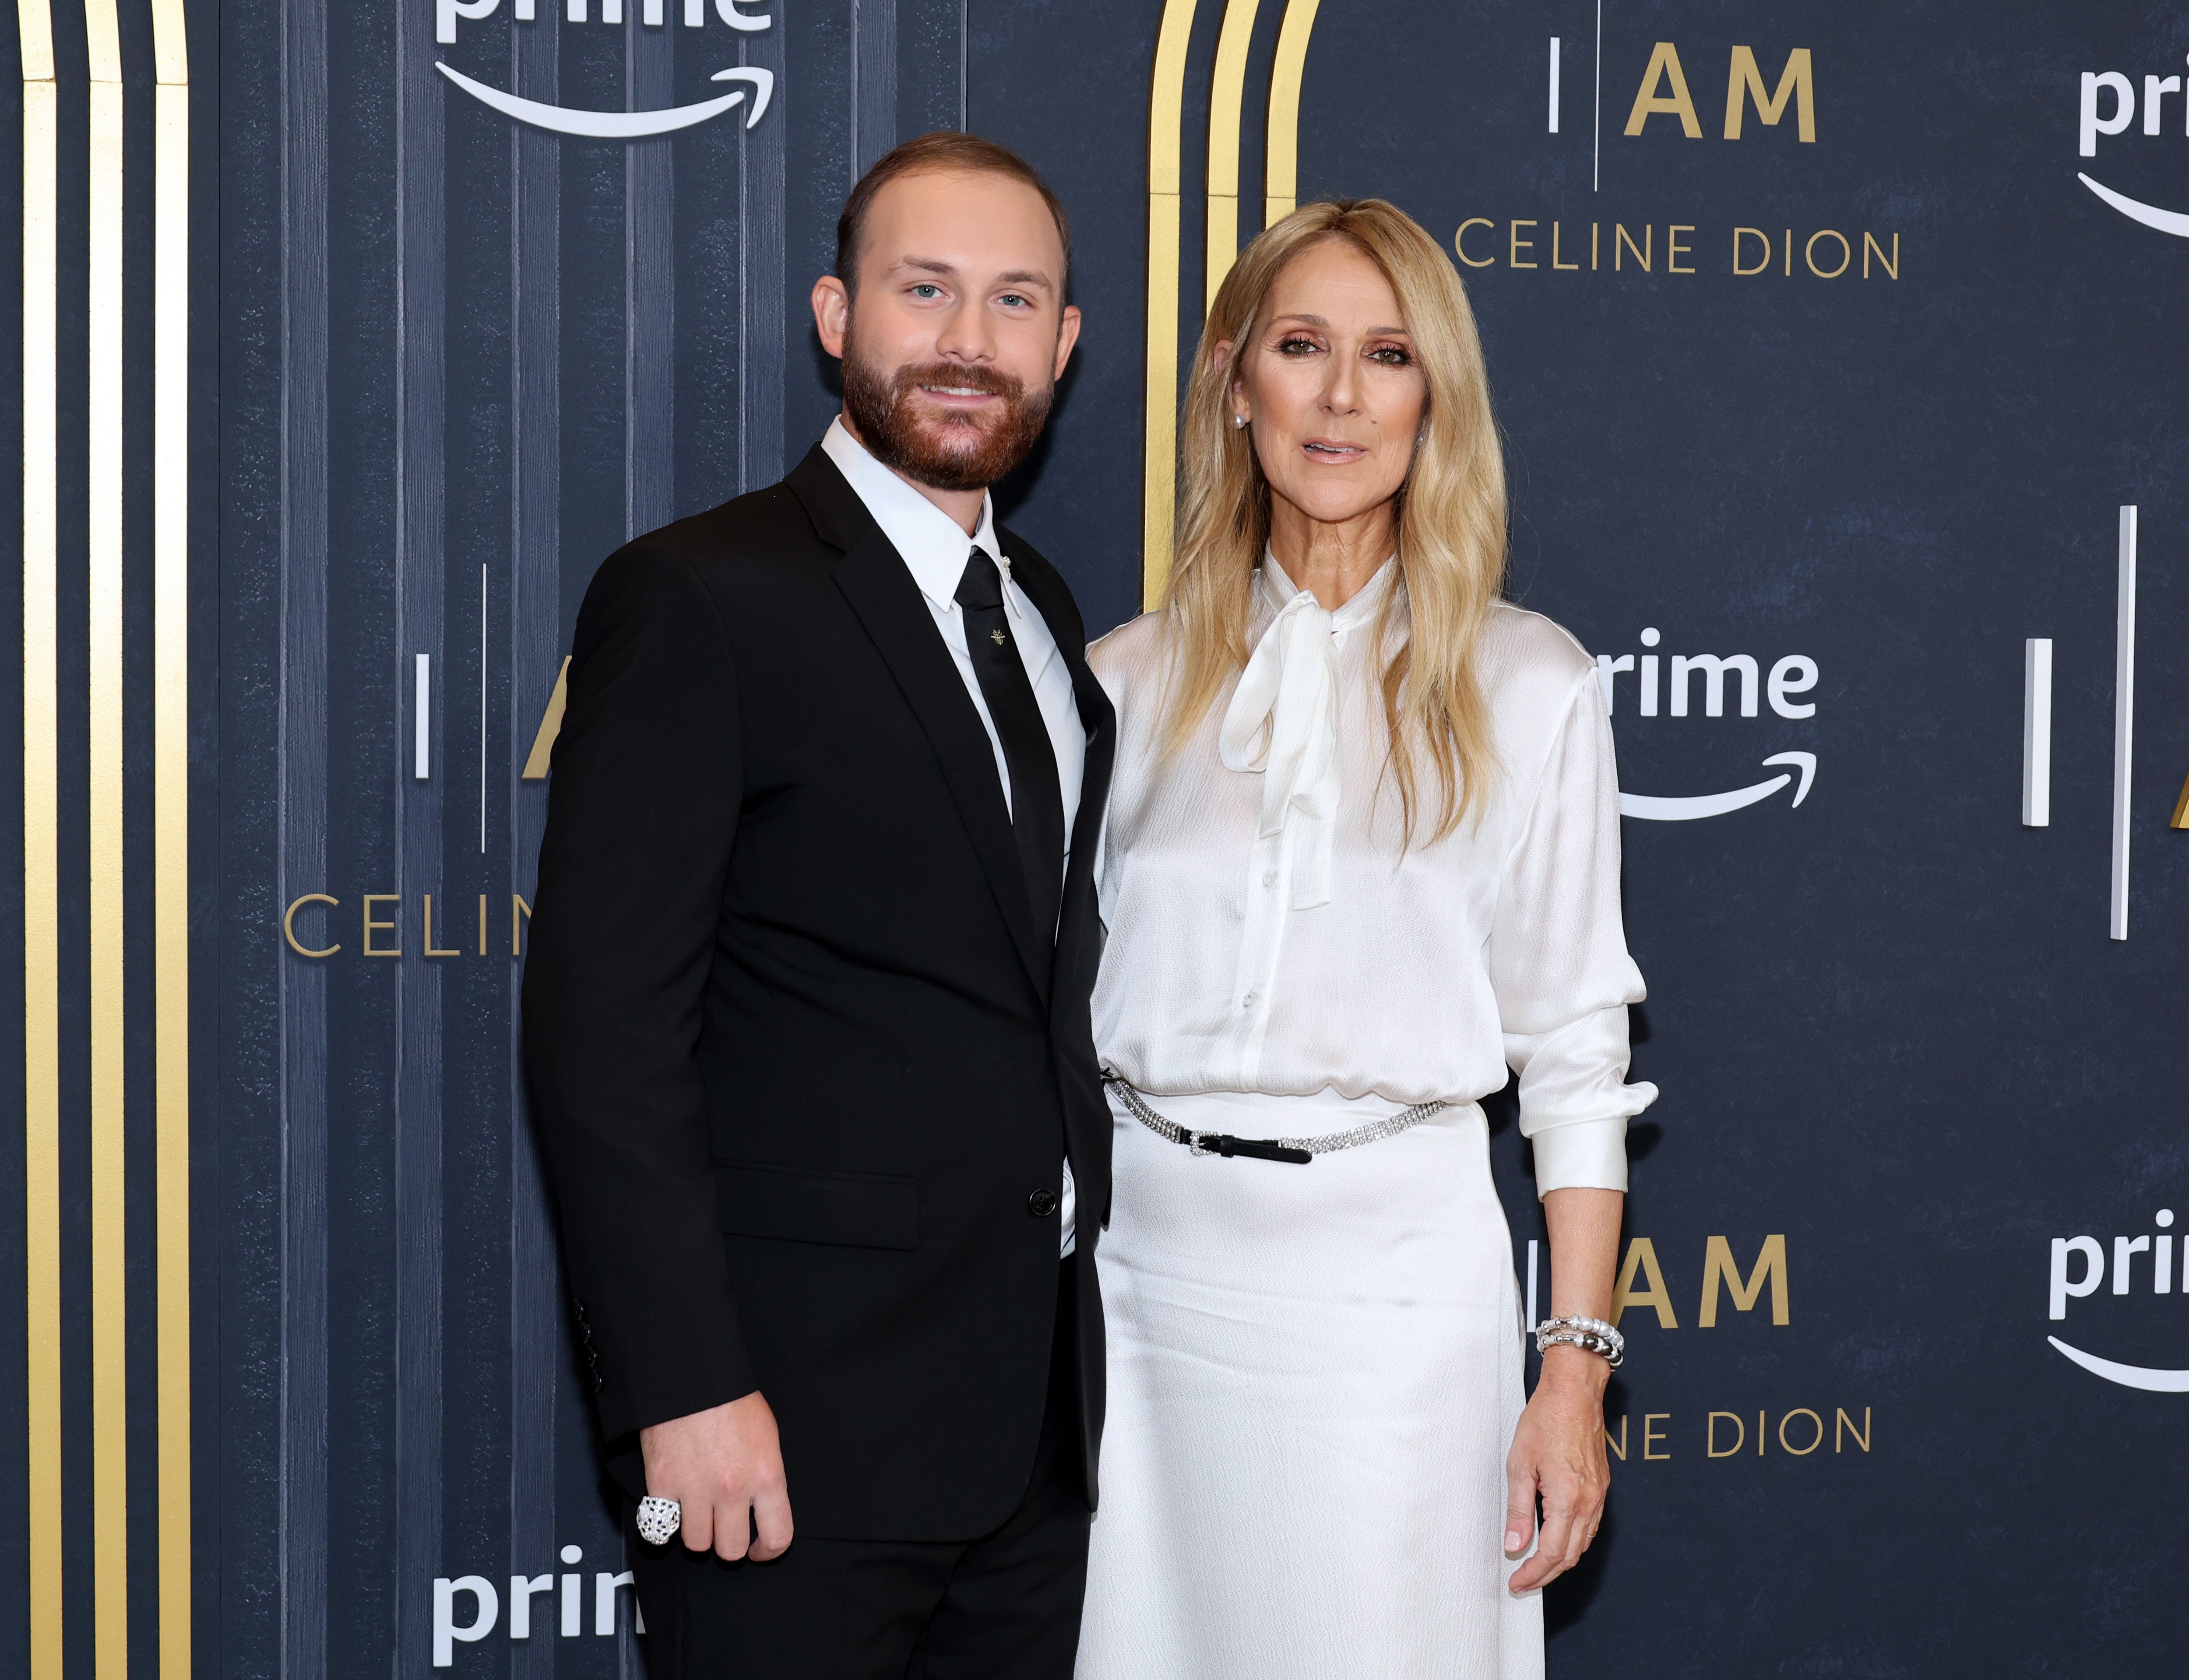 Rene-Charles Angélil and Celine Dion at the "I Am: Celine Dion" special screening in New York City on June 17, 2024. | Source: Getty Images